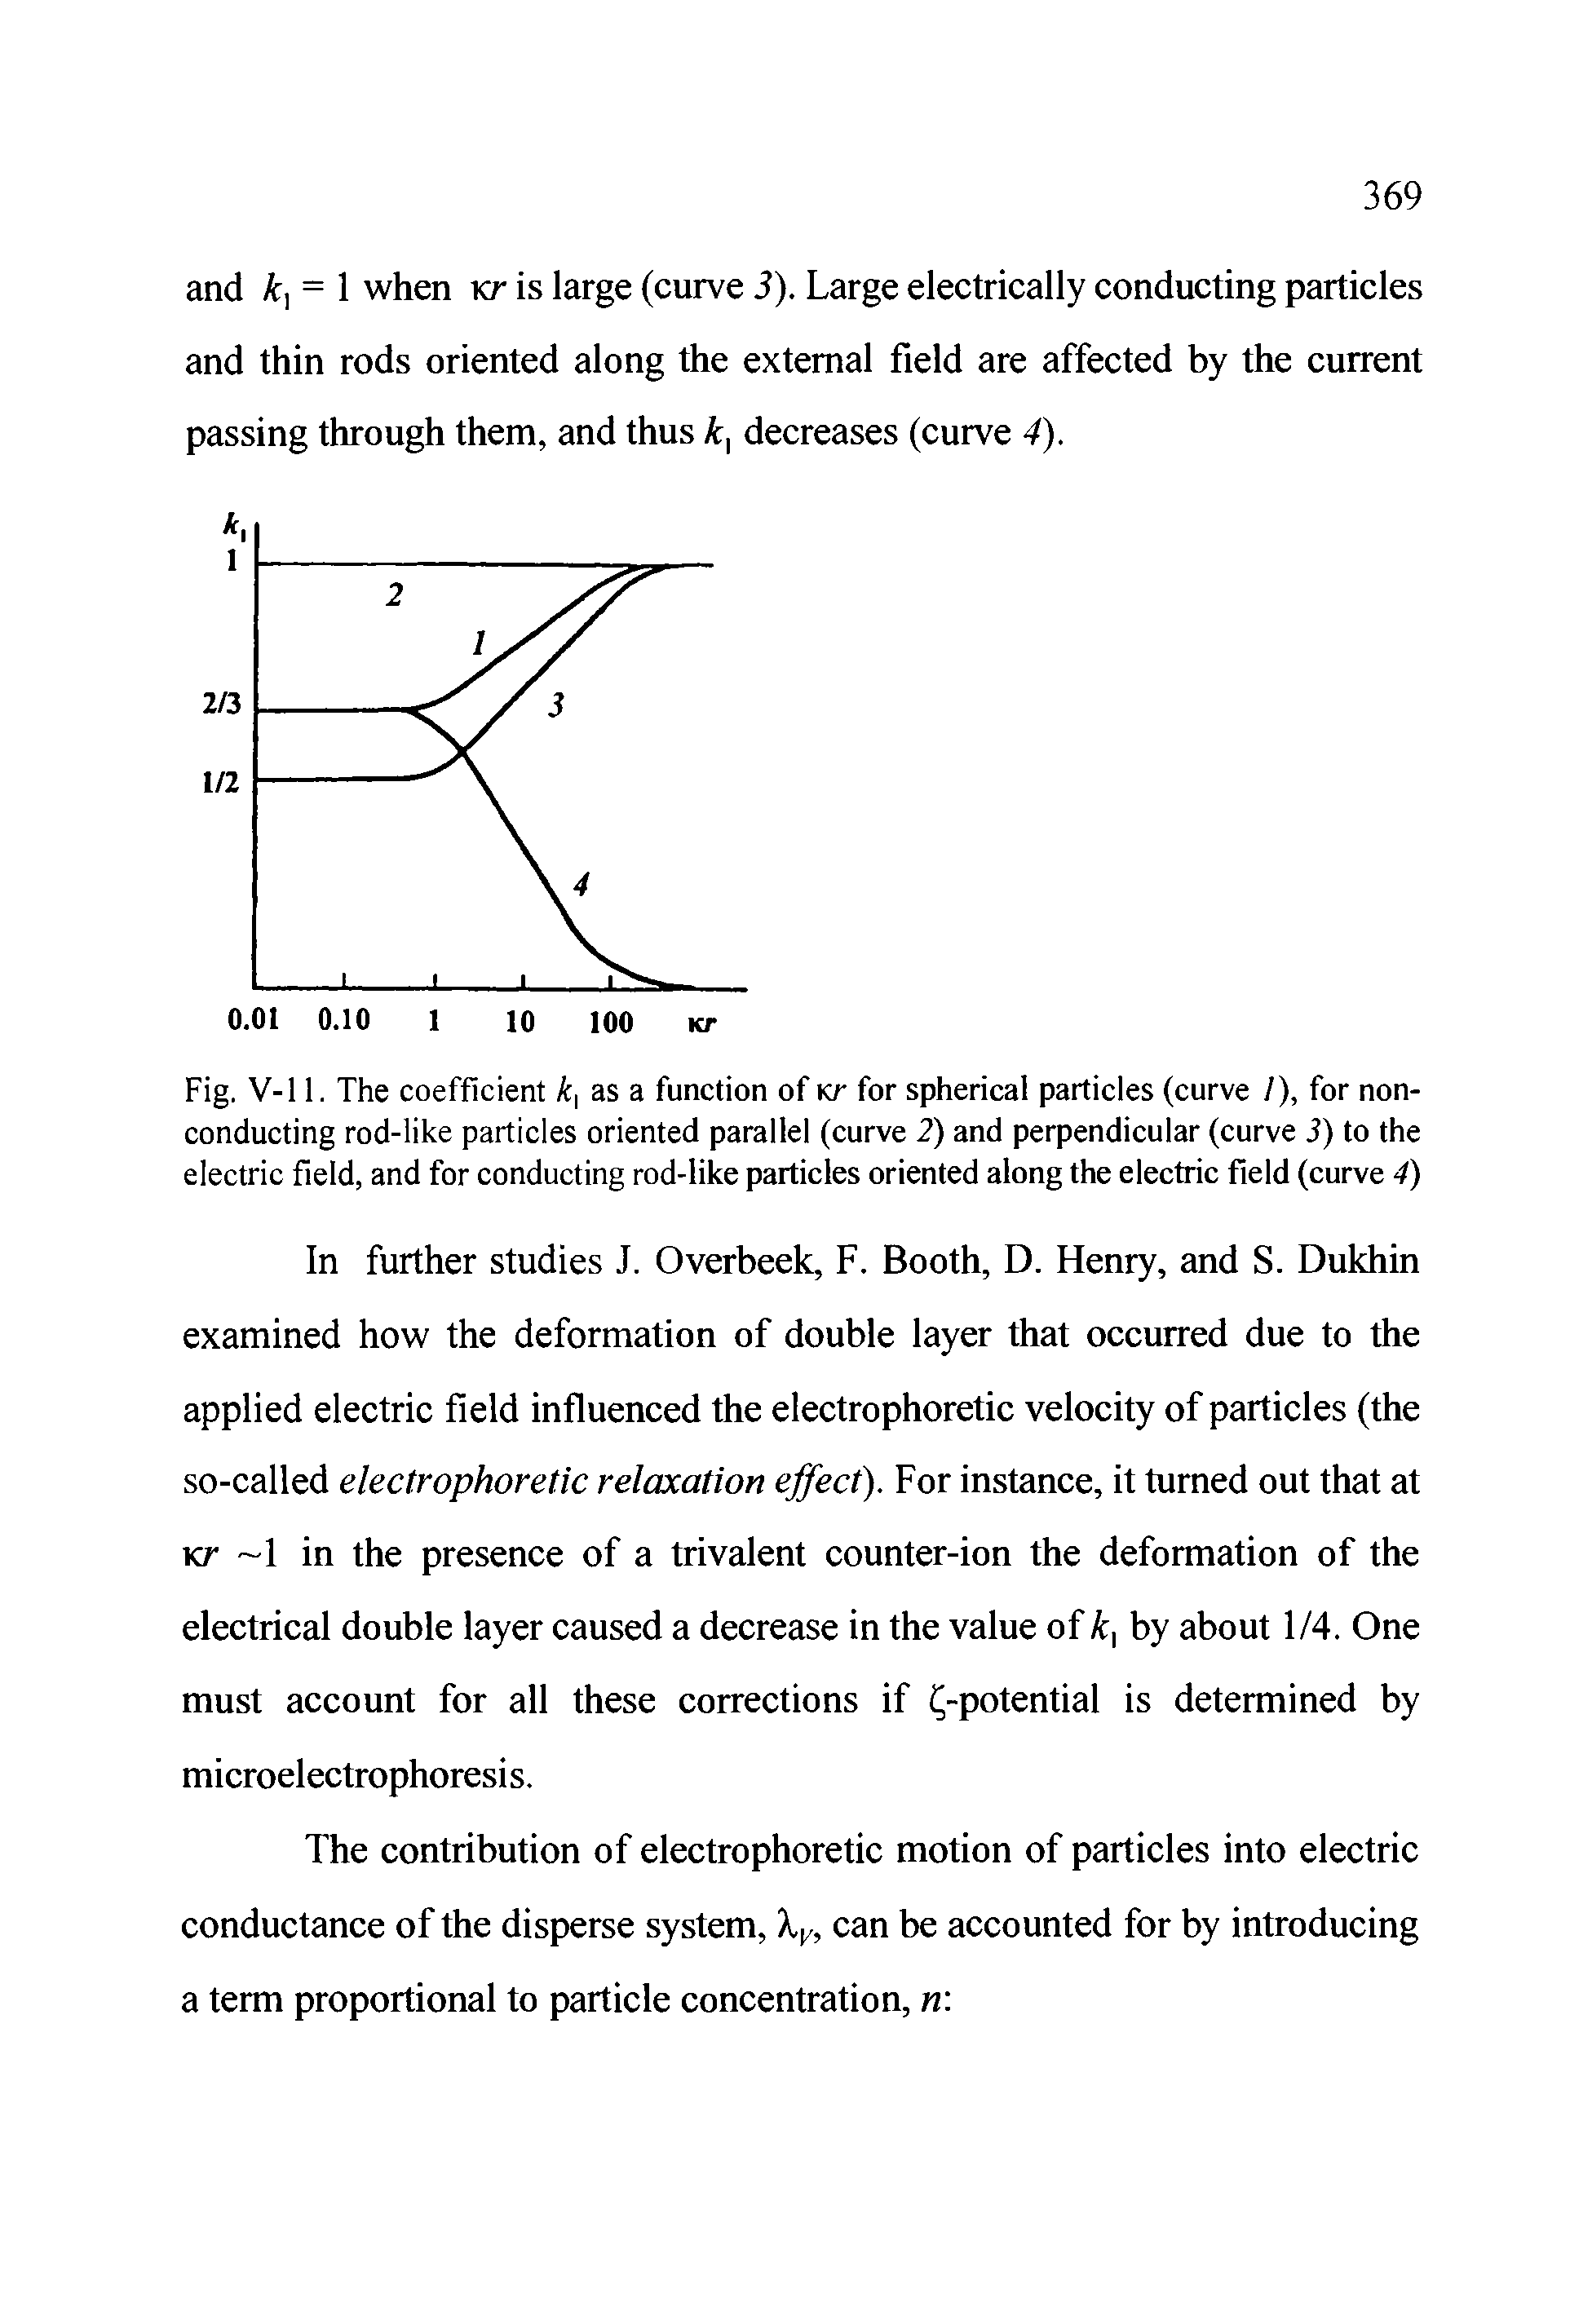 Fig. V-l 1. The coefficient as a function of kr for spherical particles (curve /), for nonconducting rod-like particles oriented parallel (curve 2) and perpendicular (curve 3) to the electric field, and for conducting rod-like particles oriented along the electric field (curve 4)...